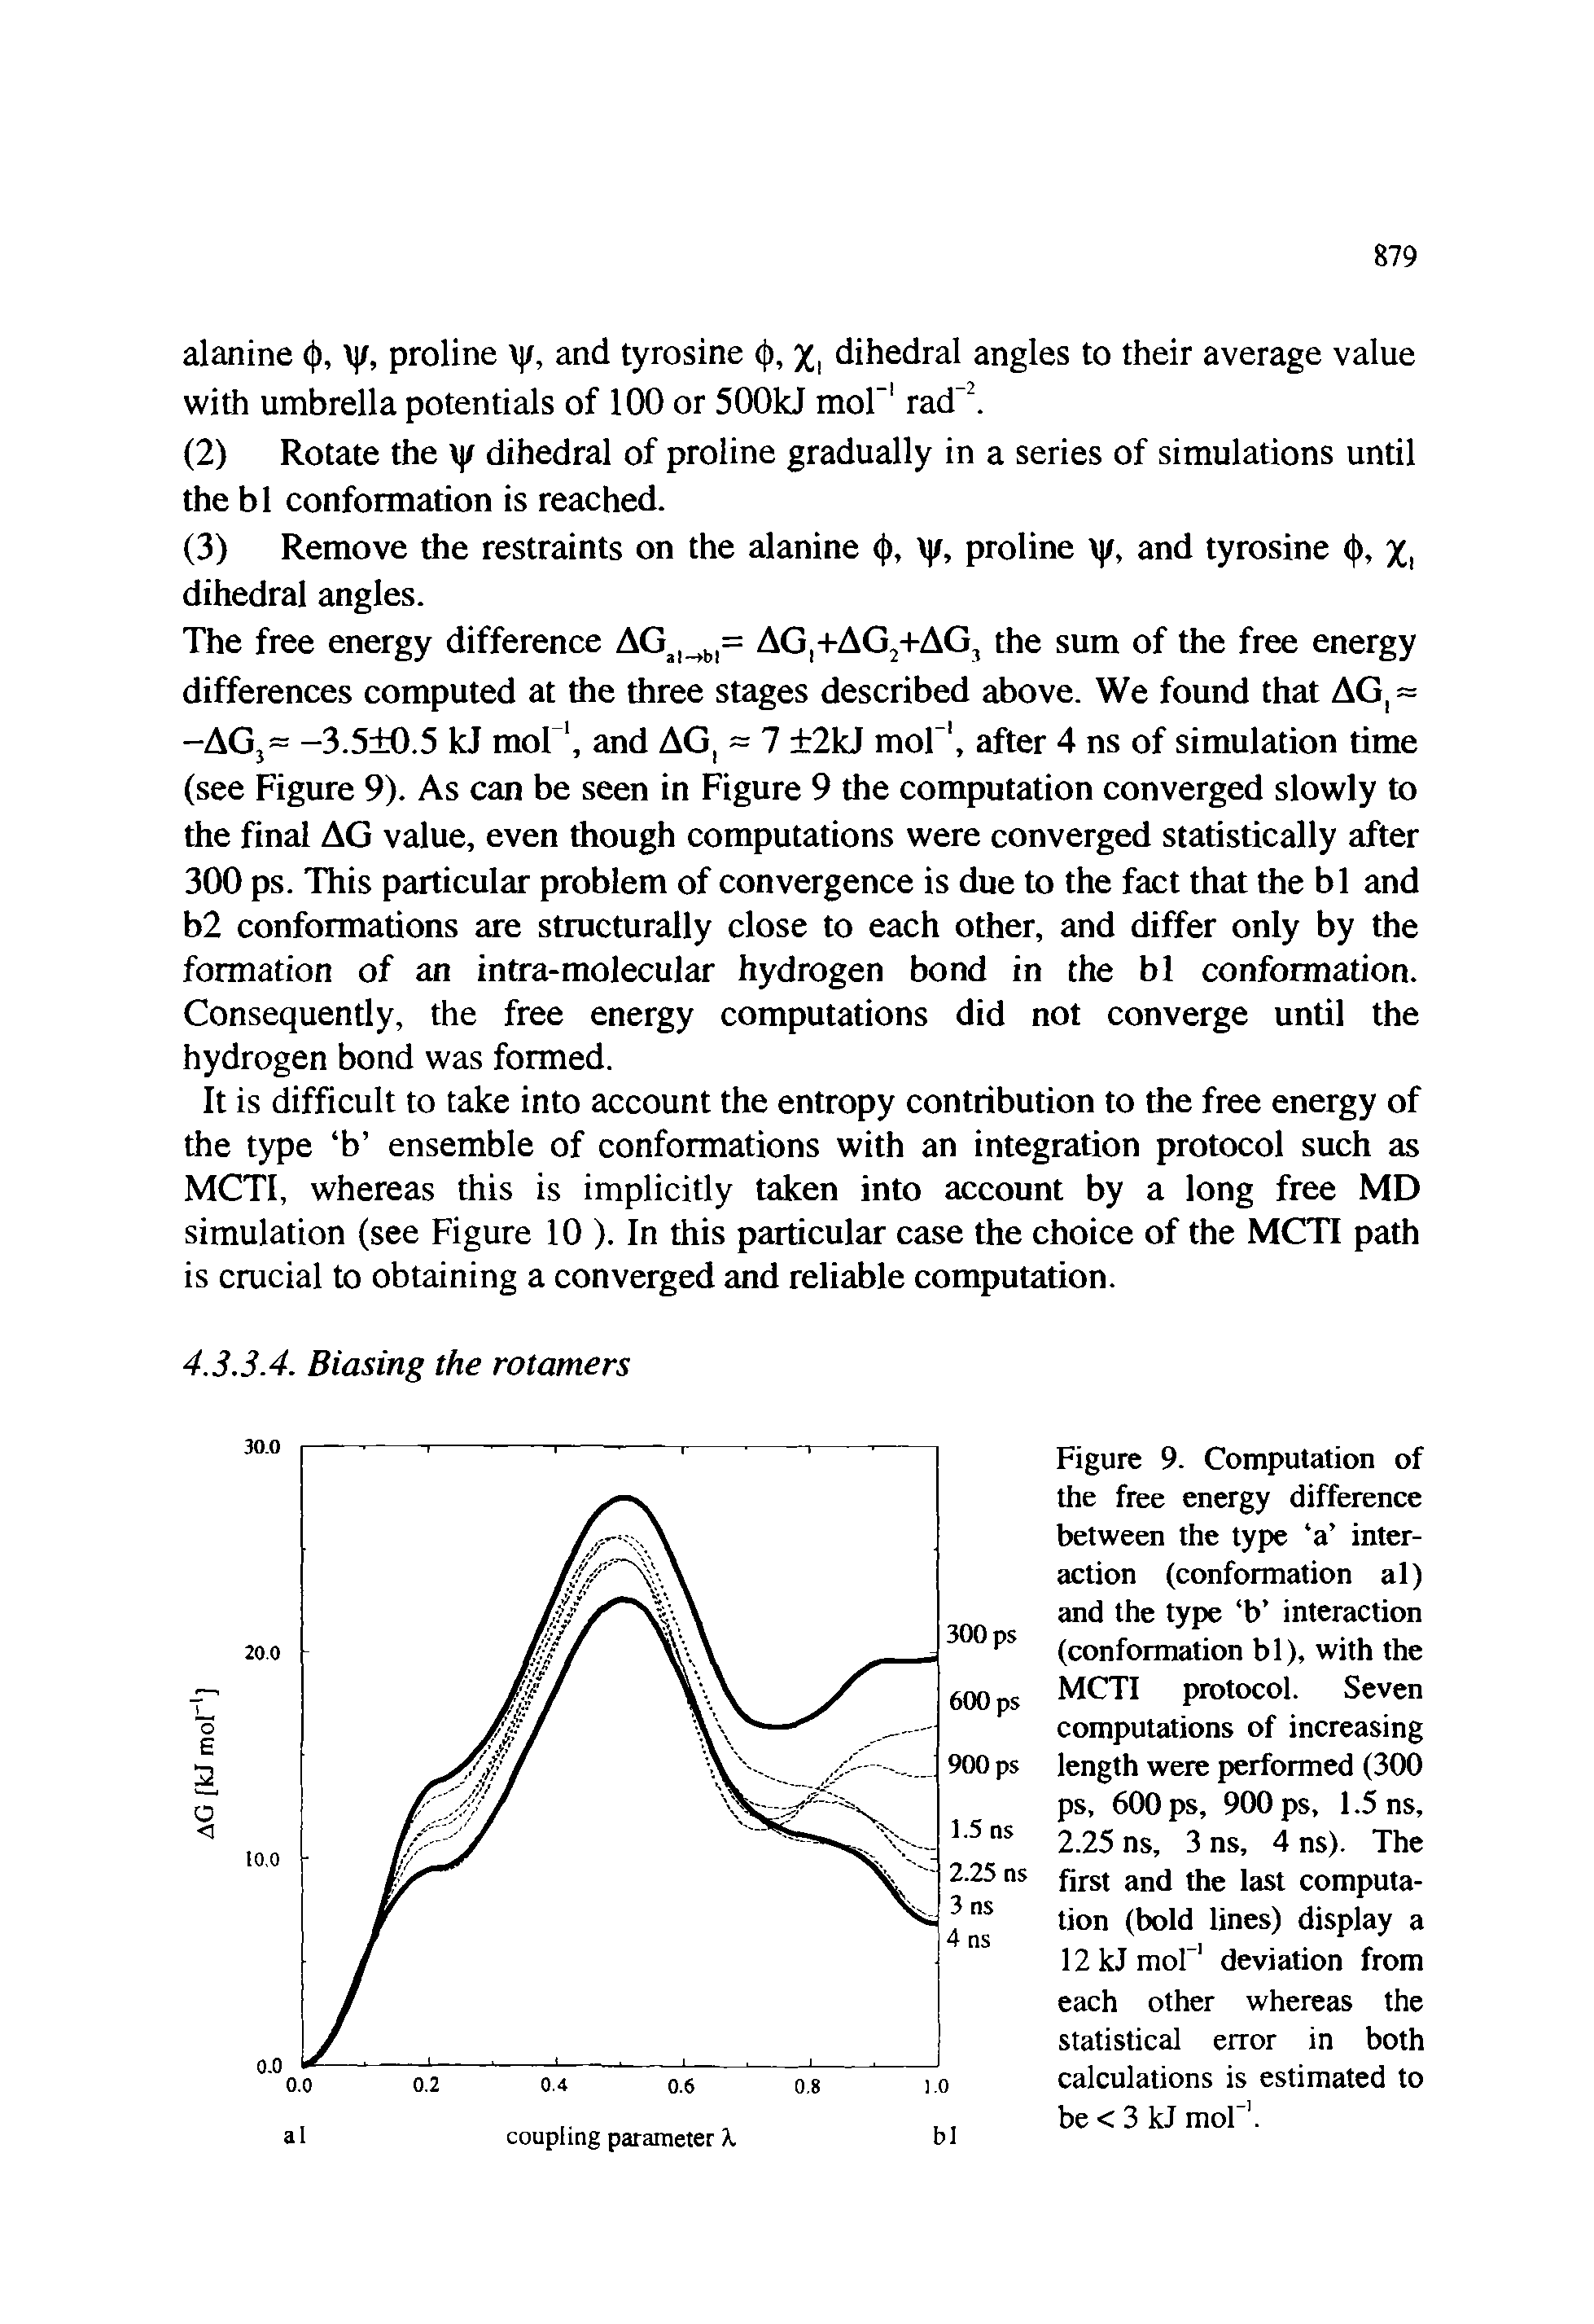 Figure 9. Computation of the free energy difference between the type a interaction (conformation al) and the type b interaction (conformation bl), with the MCTI protocol. Seven computations of increasing length were performed (300 ps, 600 ps, 900 ps, 1.5 ns, 2.25 ns, 3 ns, 4 ns). The first and the last computation (bold lines) display a 12kJmor deviation from each other whereas the statistical error in both calculations is estimated to be < 3 kJ mol". ...